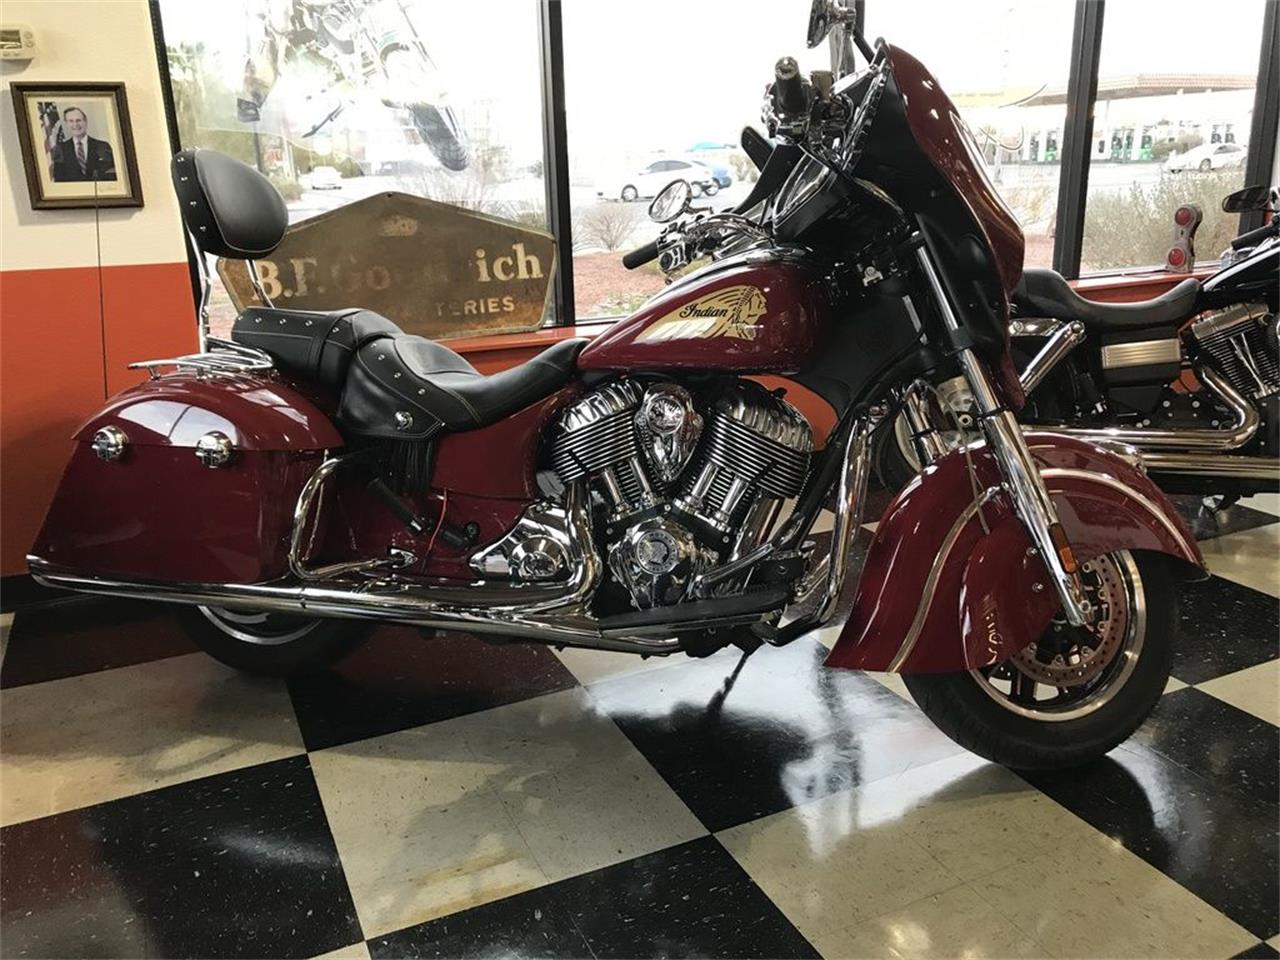 2014 Indian Chieftain for sale in Henderson, NV – photo 2